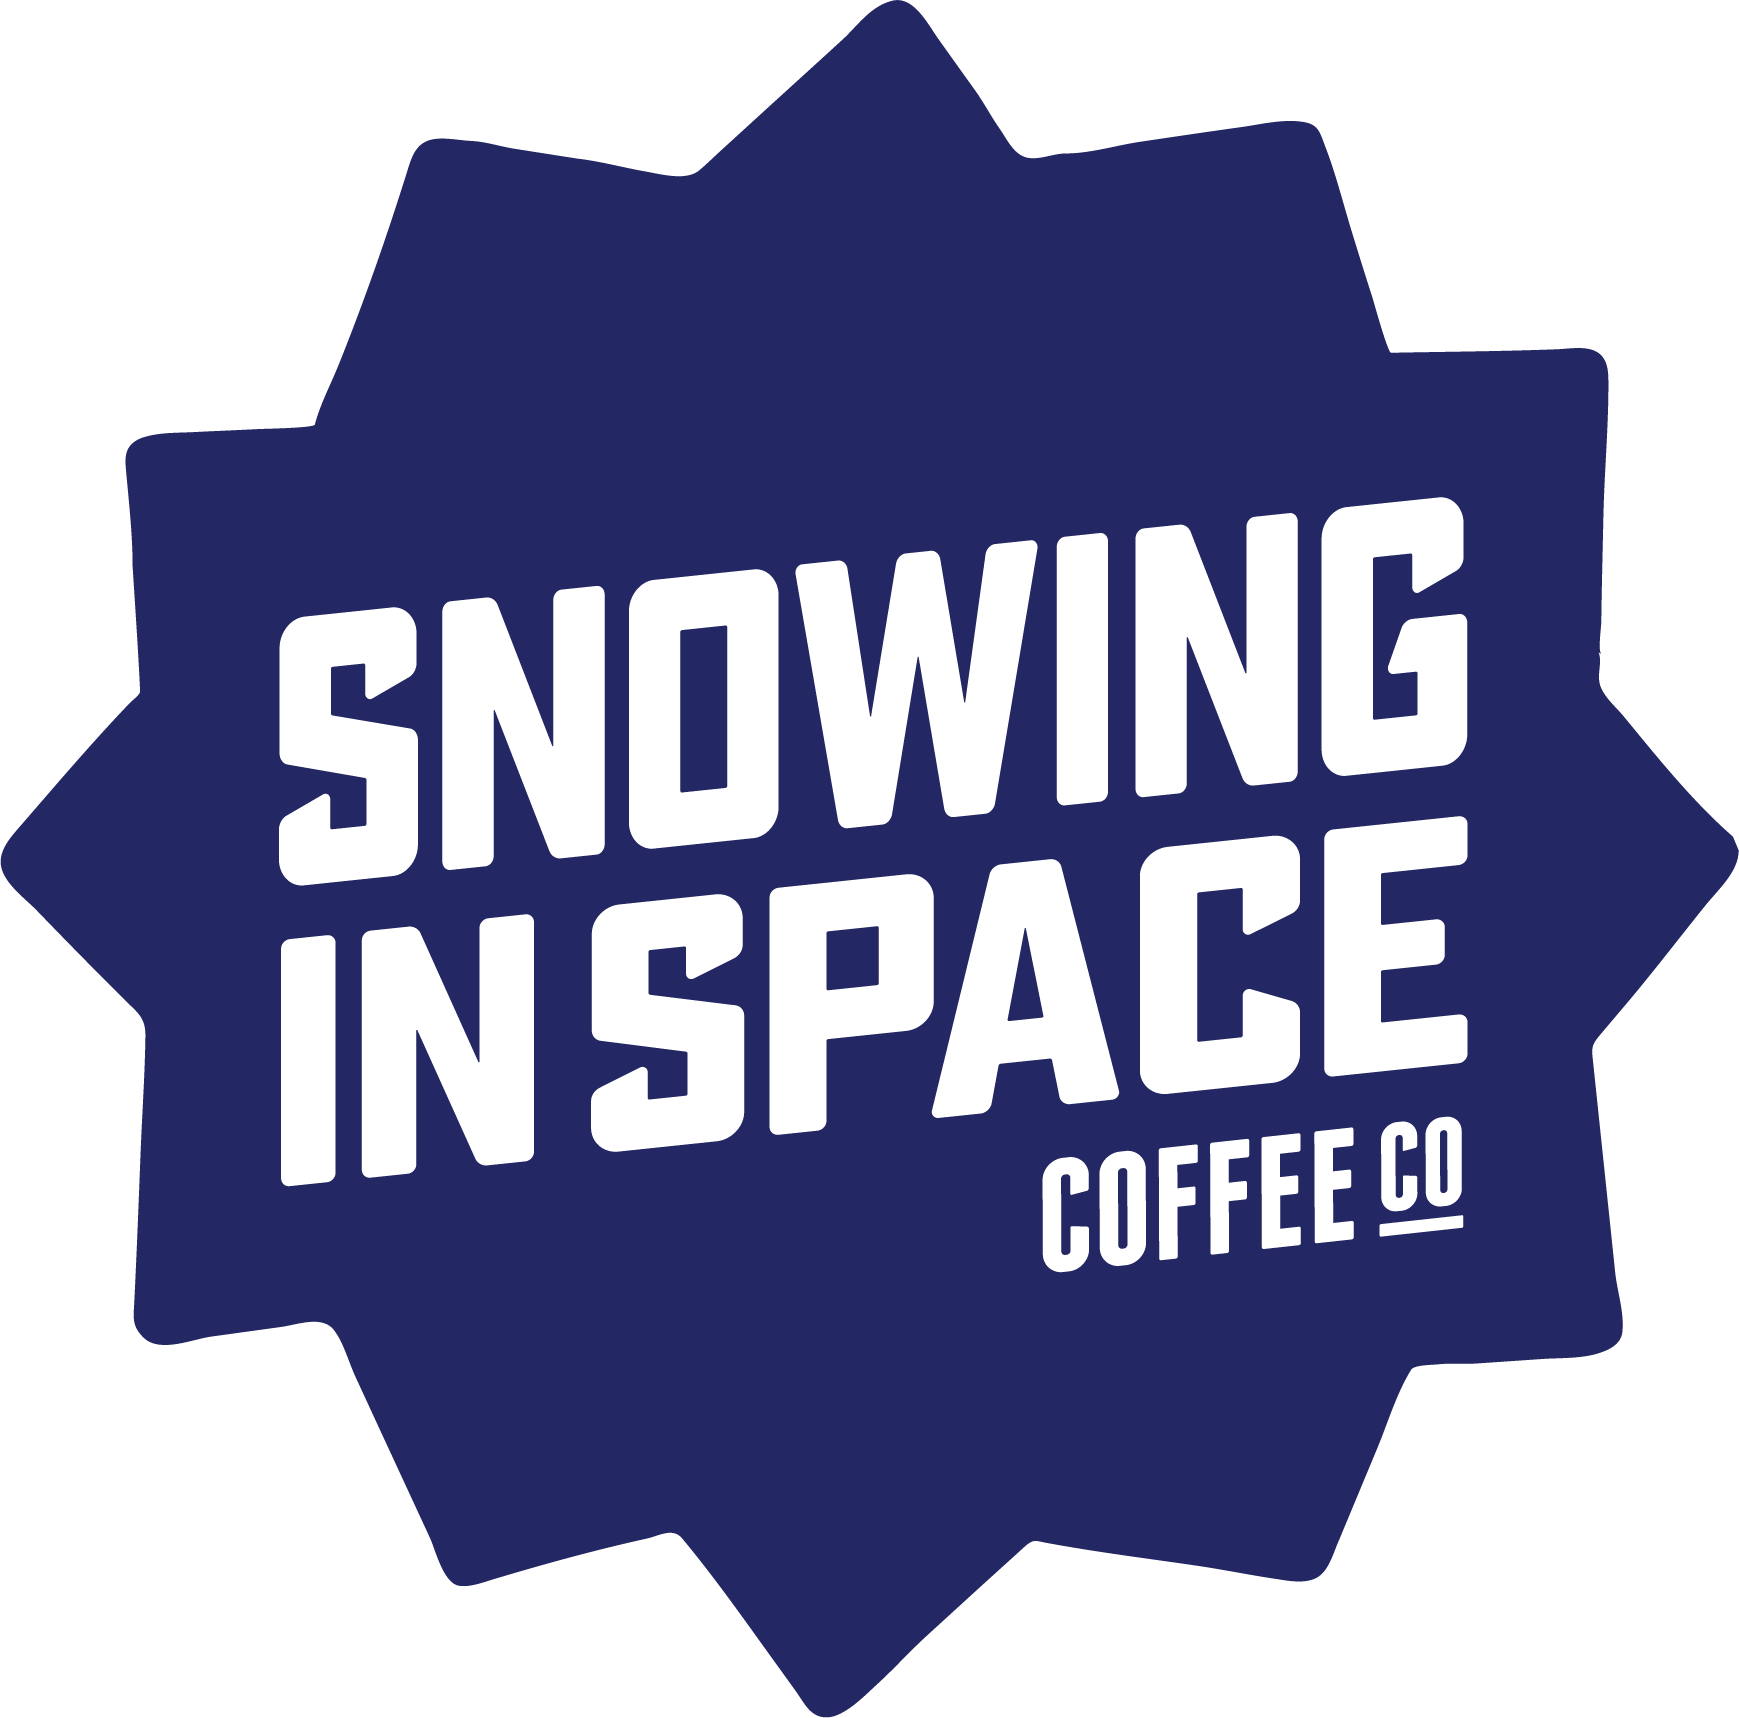 Snowing in Space Coffee